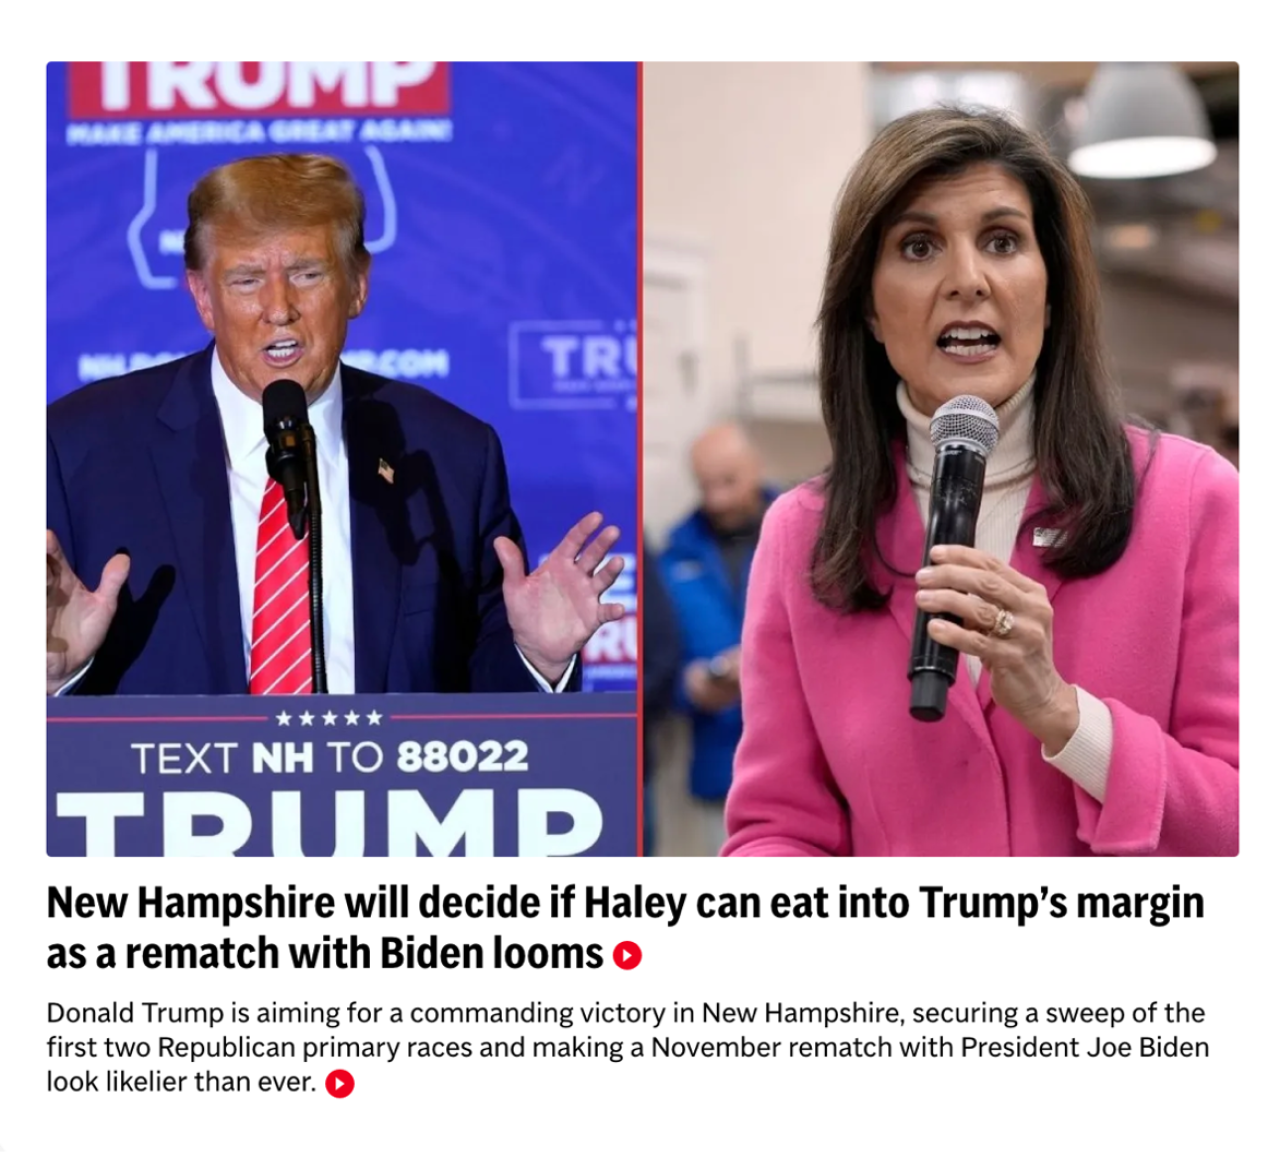 side-by-side images of Trump and Haley campaigning with caption, "New Hampshire will decide if Haley can eat into Trump's margin as a remoatch with Biden looms."